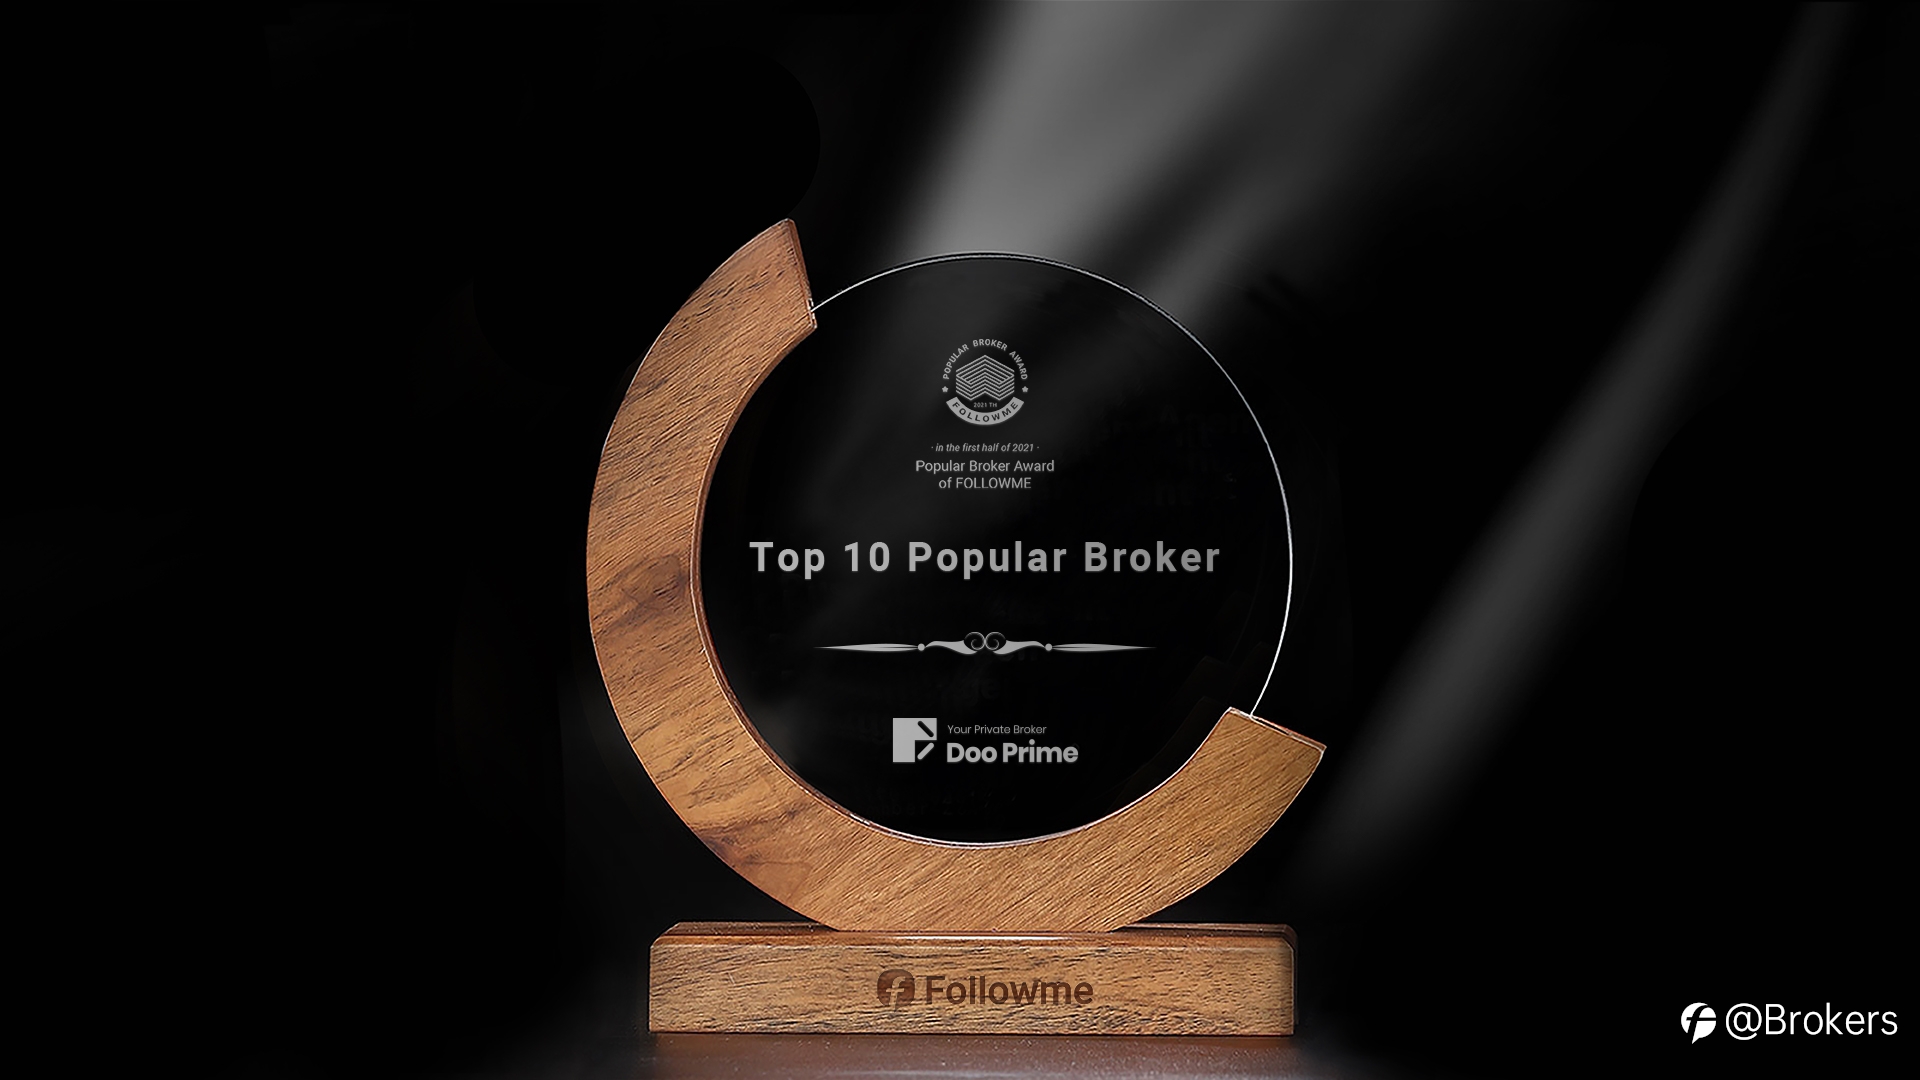 10 Brokers are awarded by FOLLOWME in the first half of 2021